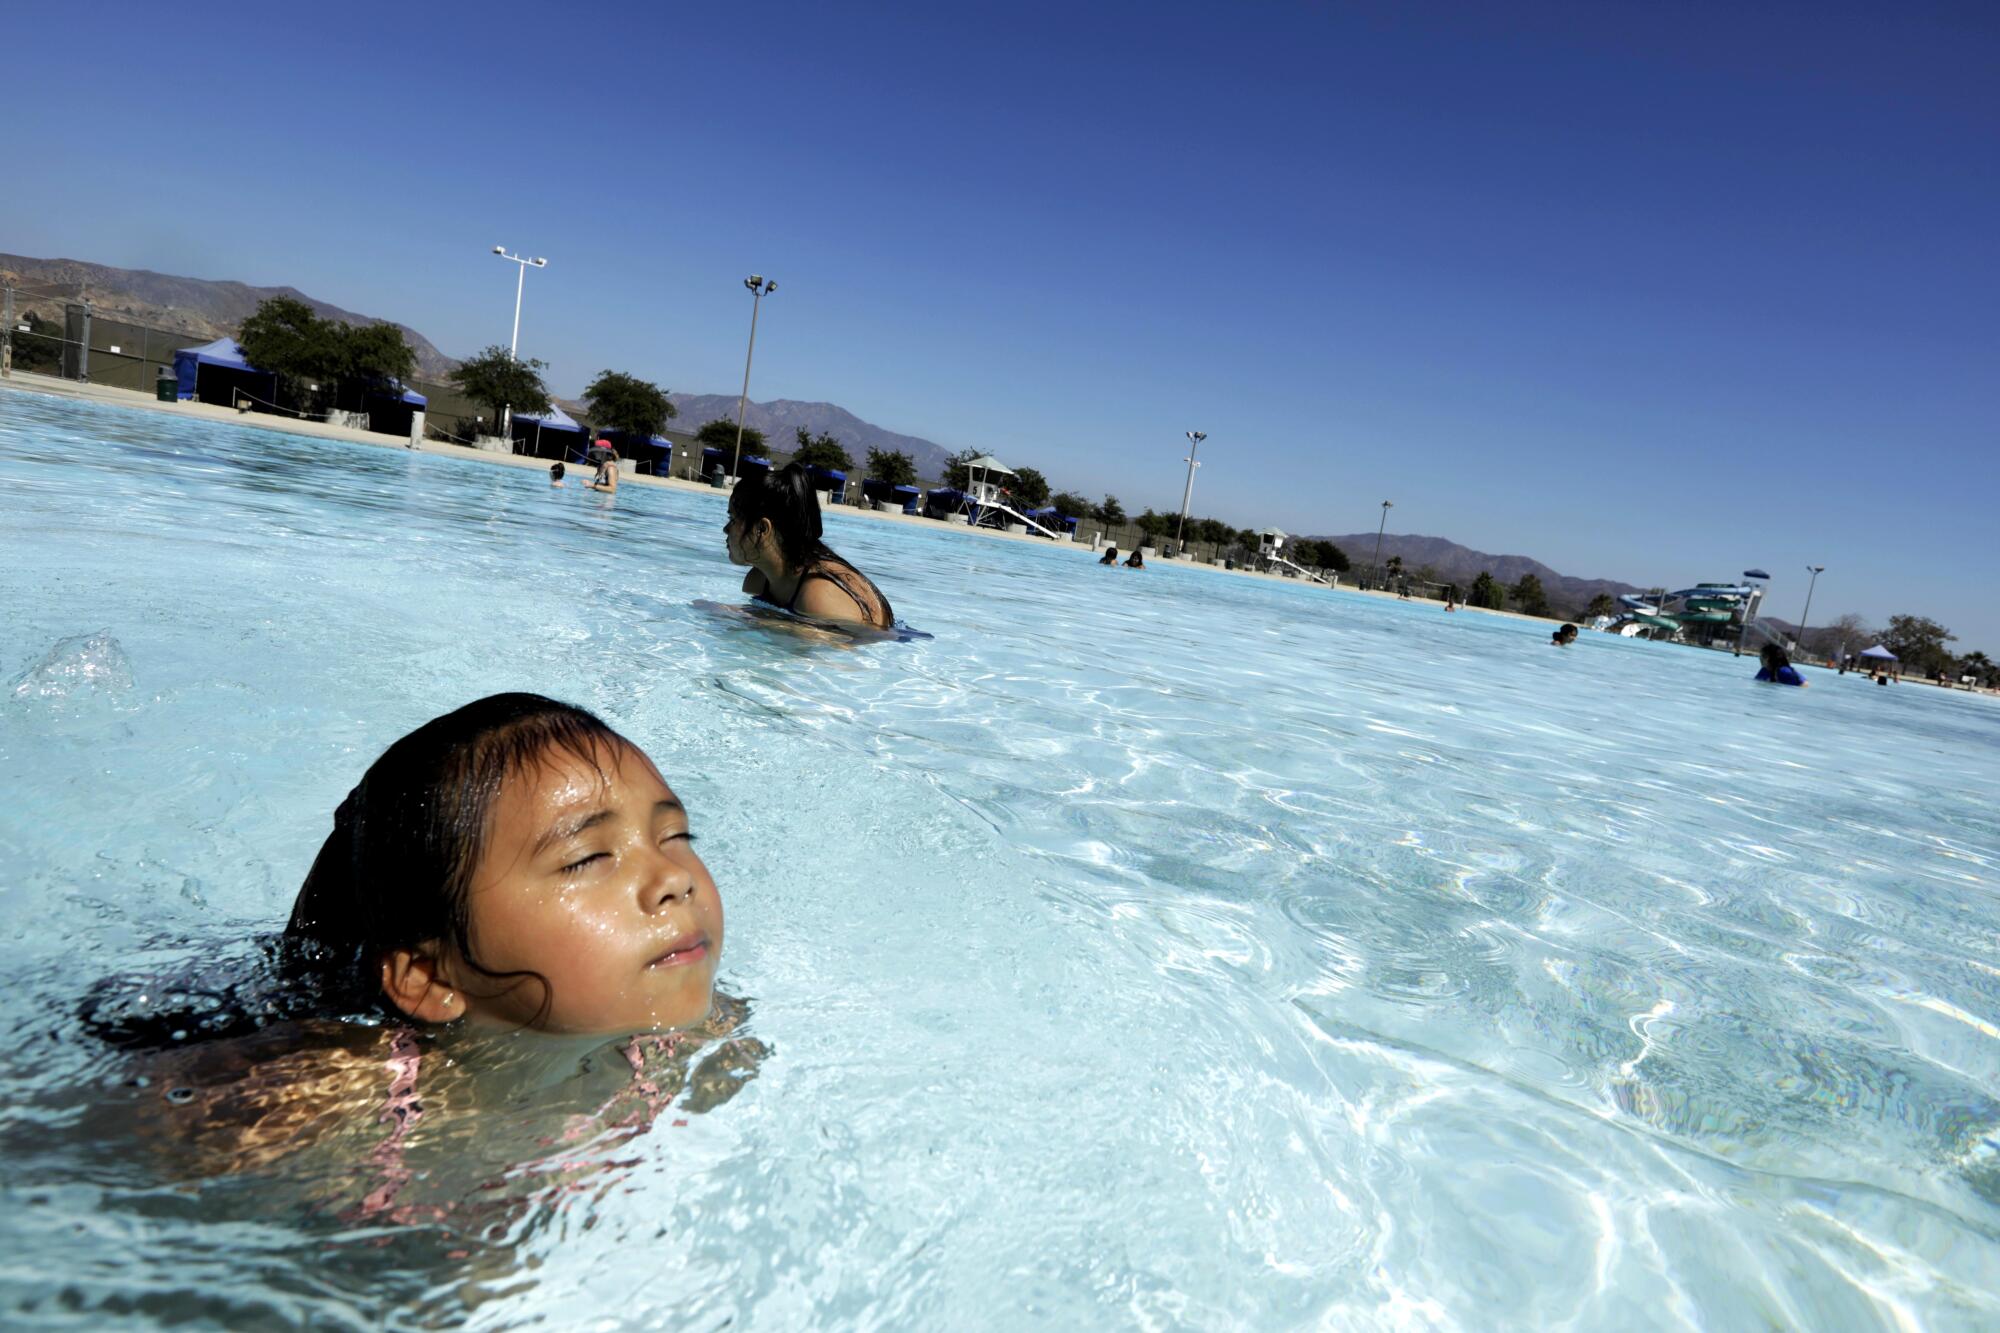 Mia B.Mendez, 6, foreground, and her aunt Alejandra Oropeza, 16, cool off in a swimming lake.